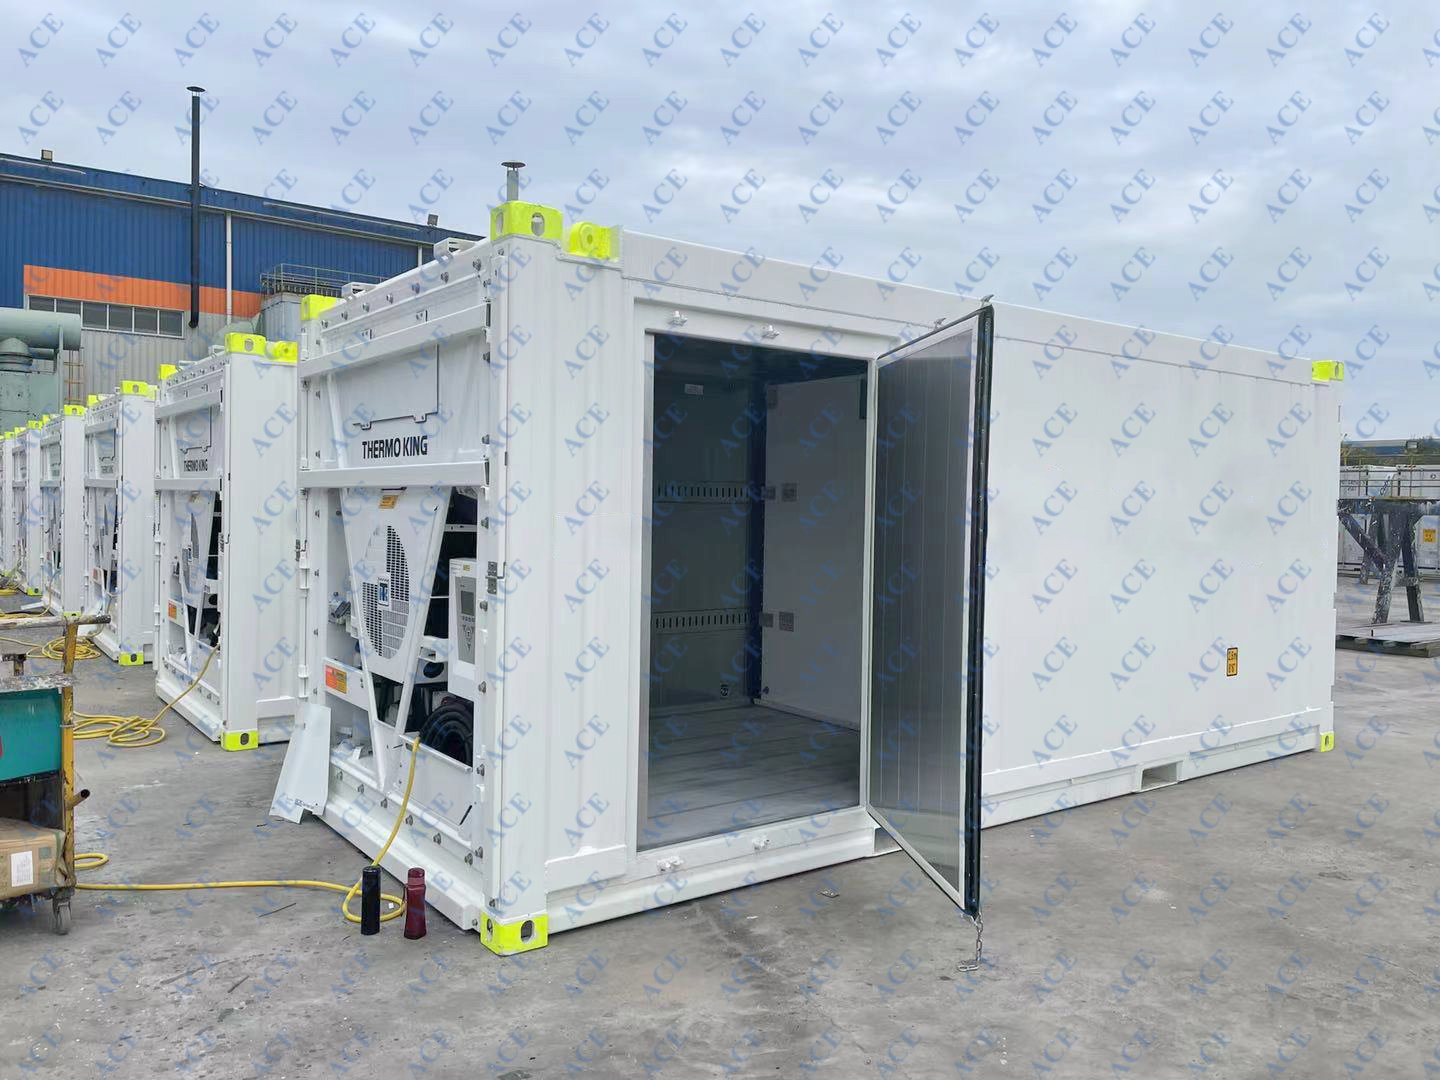 DNV 2.7-1 and CSC Double Certified 20ft Offshore Containers